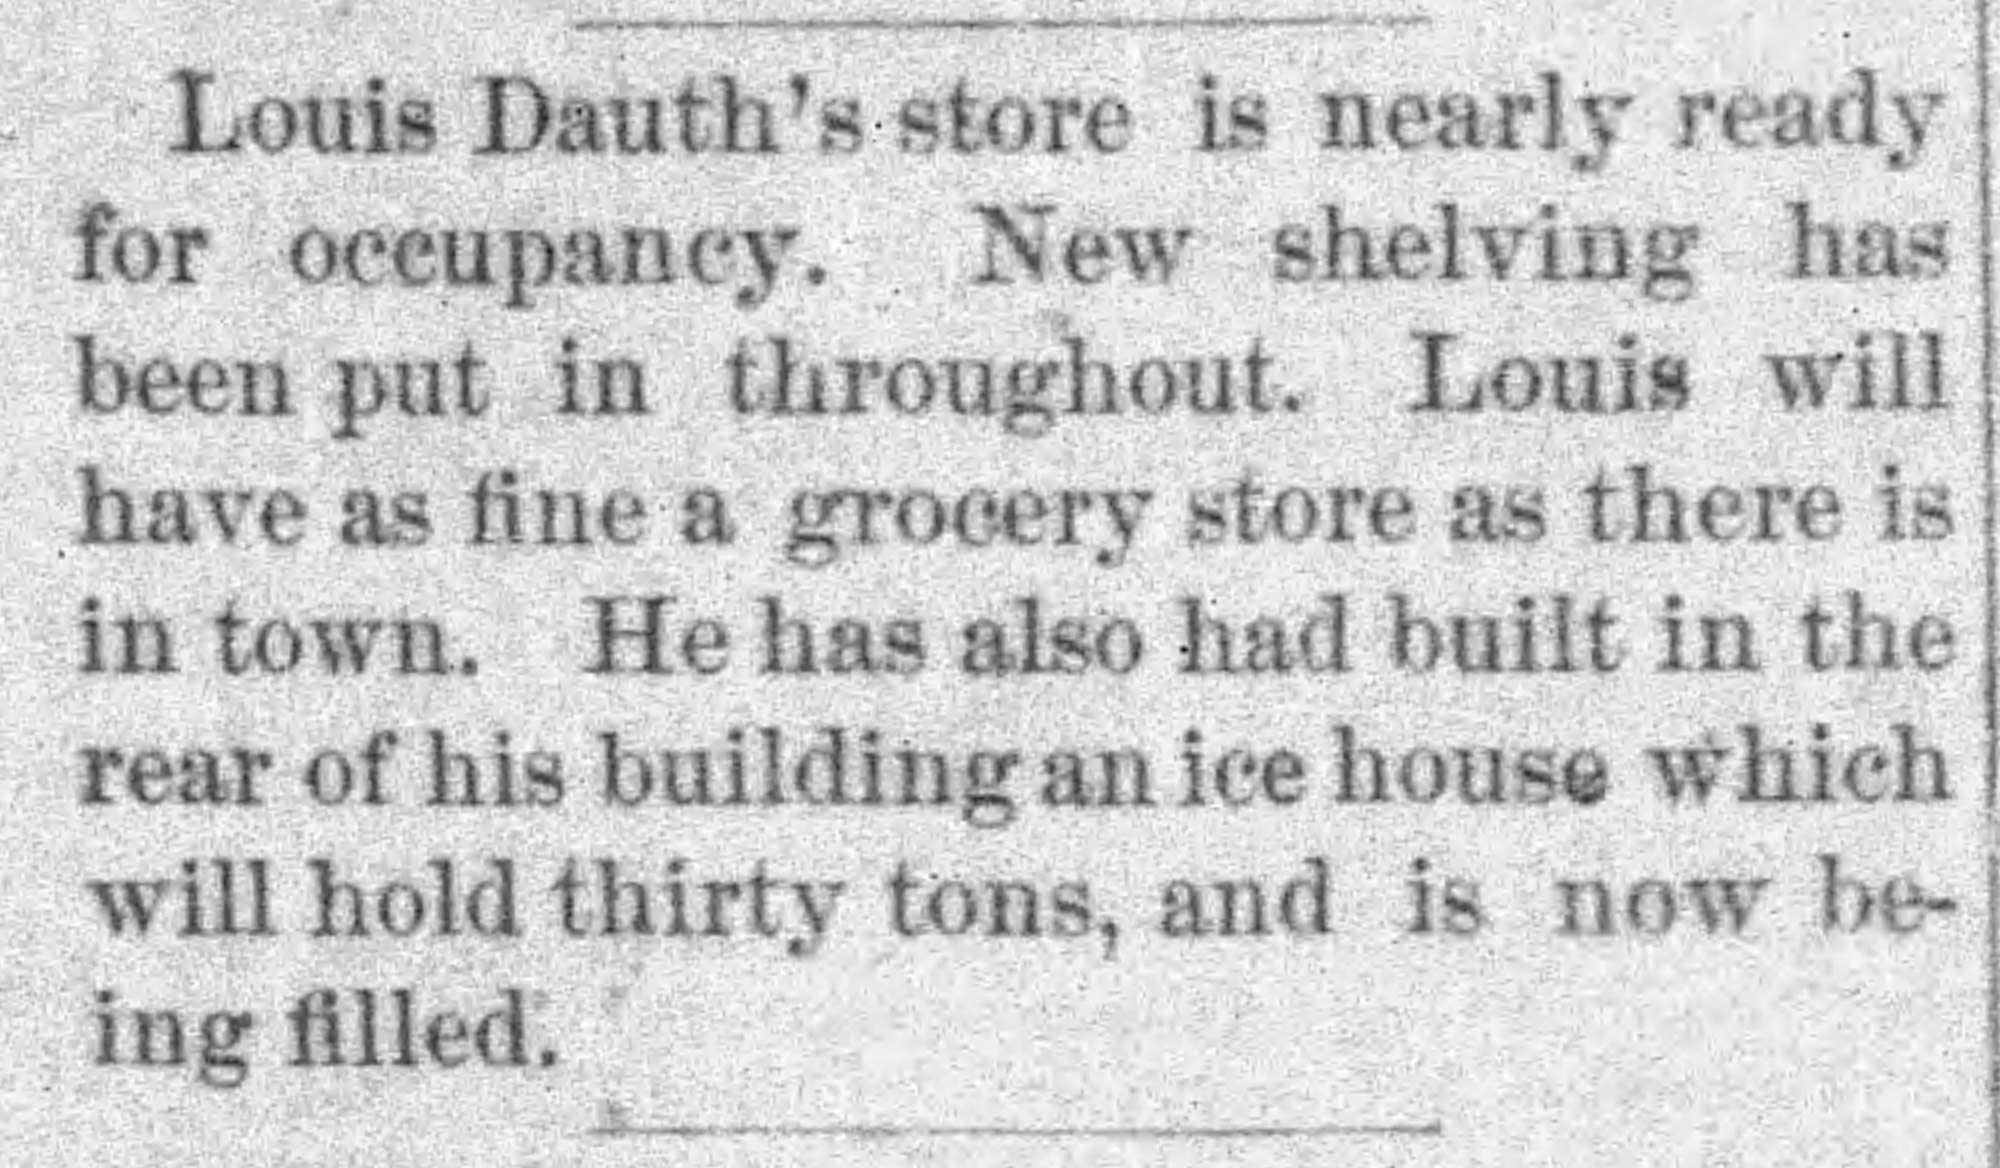 Dauth Family Archive - 1883-01-25 - The Daily Express - Louis Dauth Builds 30 Ton Ice House